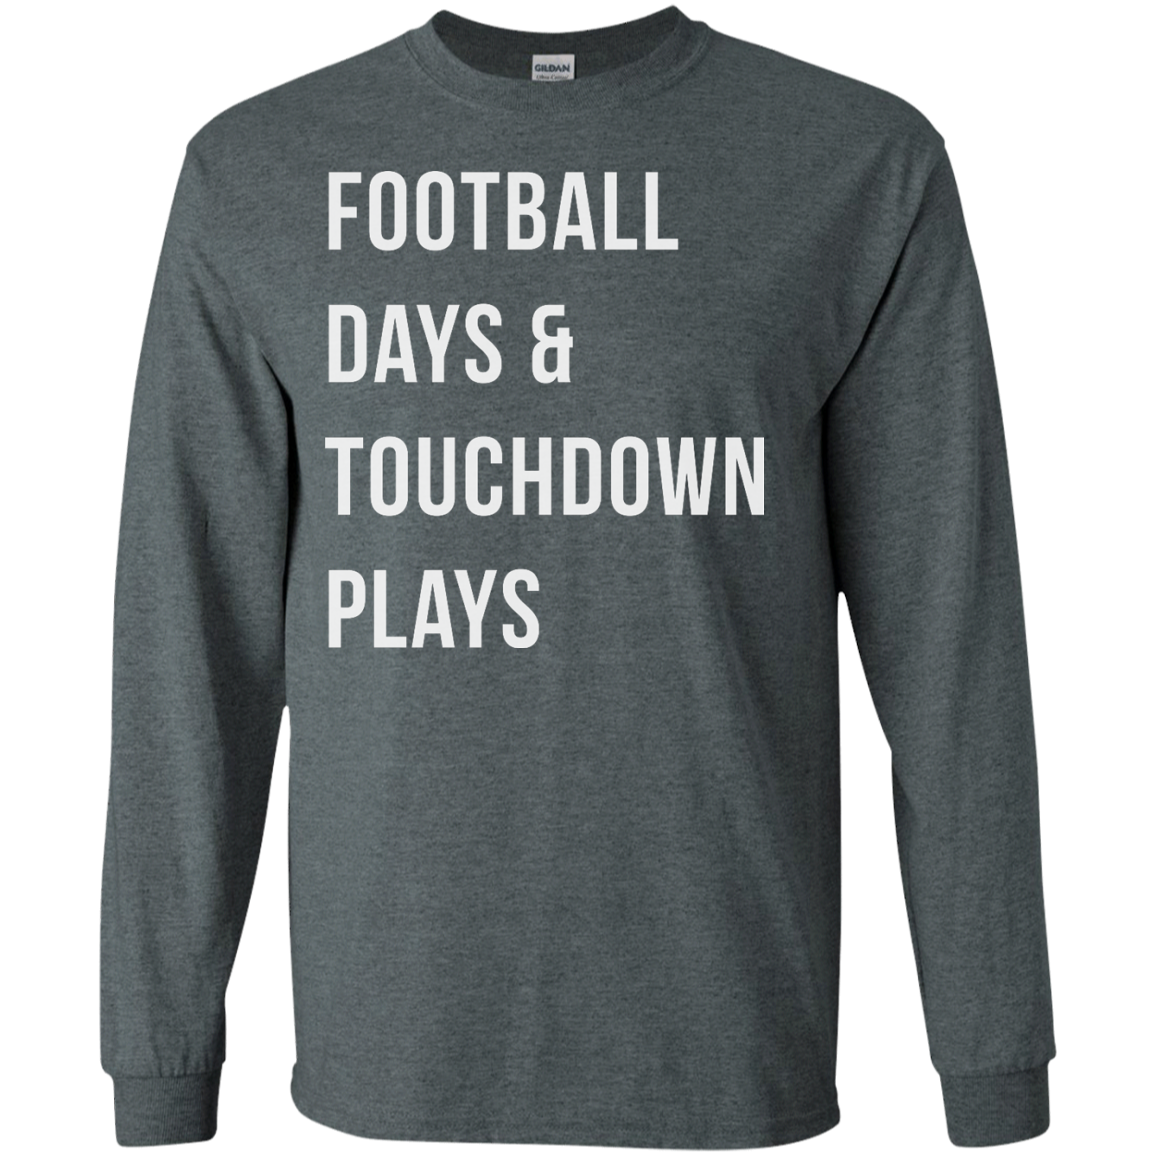 Football days and touchdown plays t-shirt, tank, hoodie